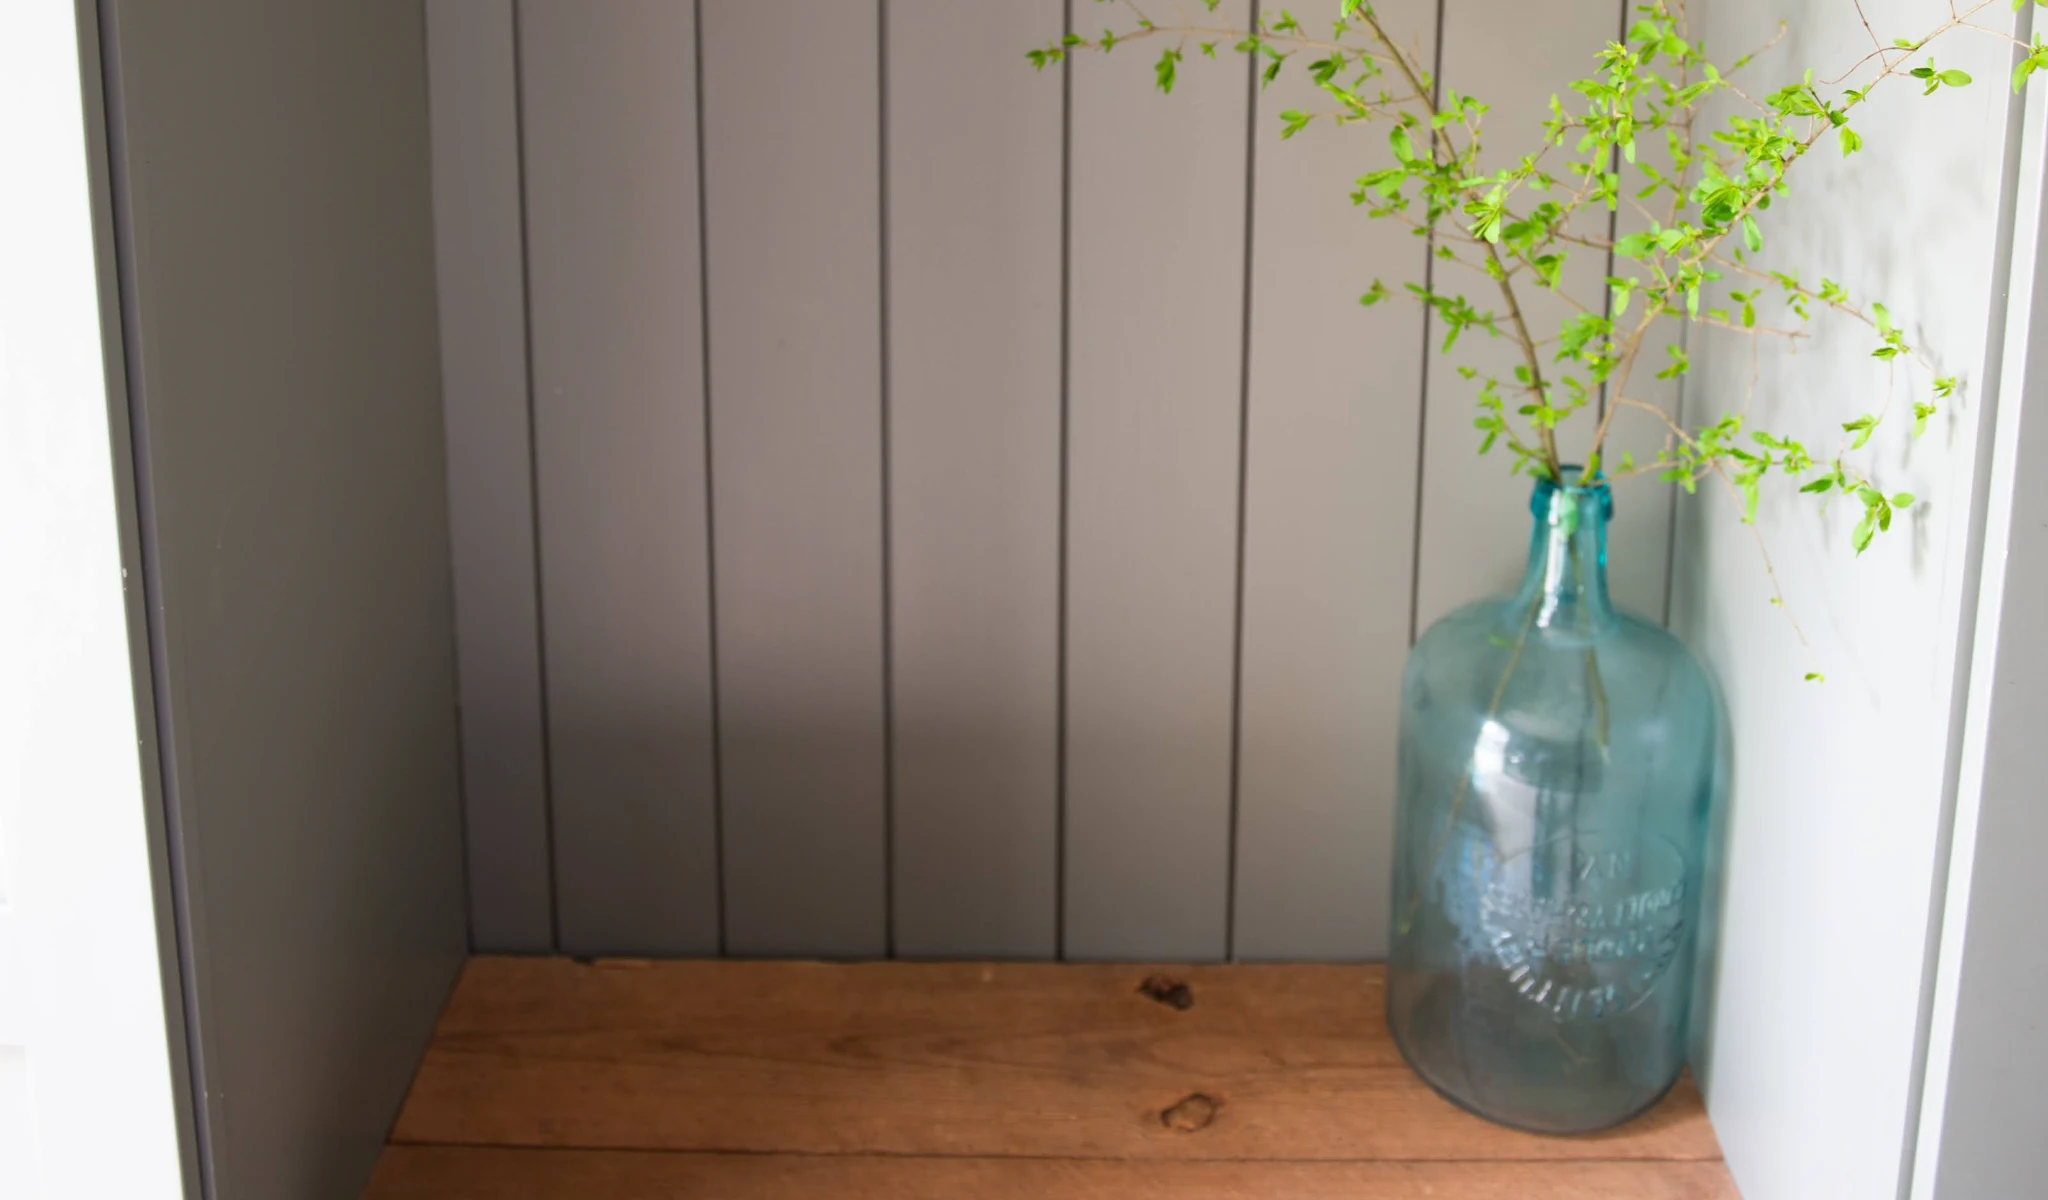 A blue vase with a plant in it sits on a wooden shelf.